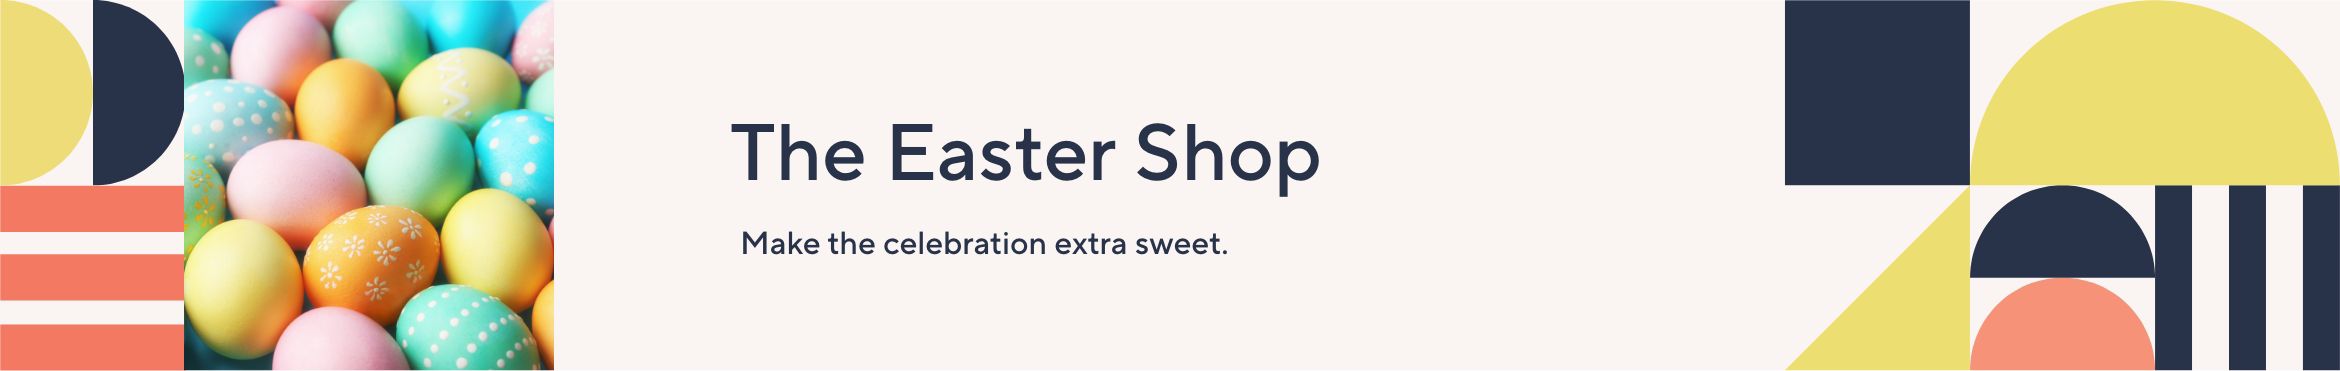 The Easter Shop: Make the celebration extra sweet.